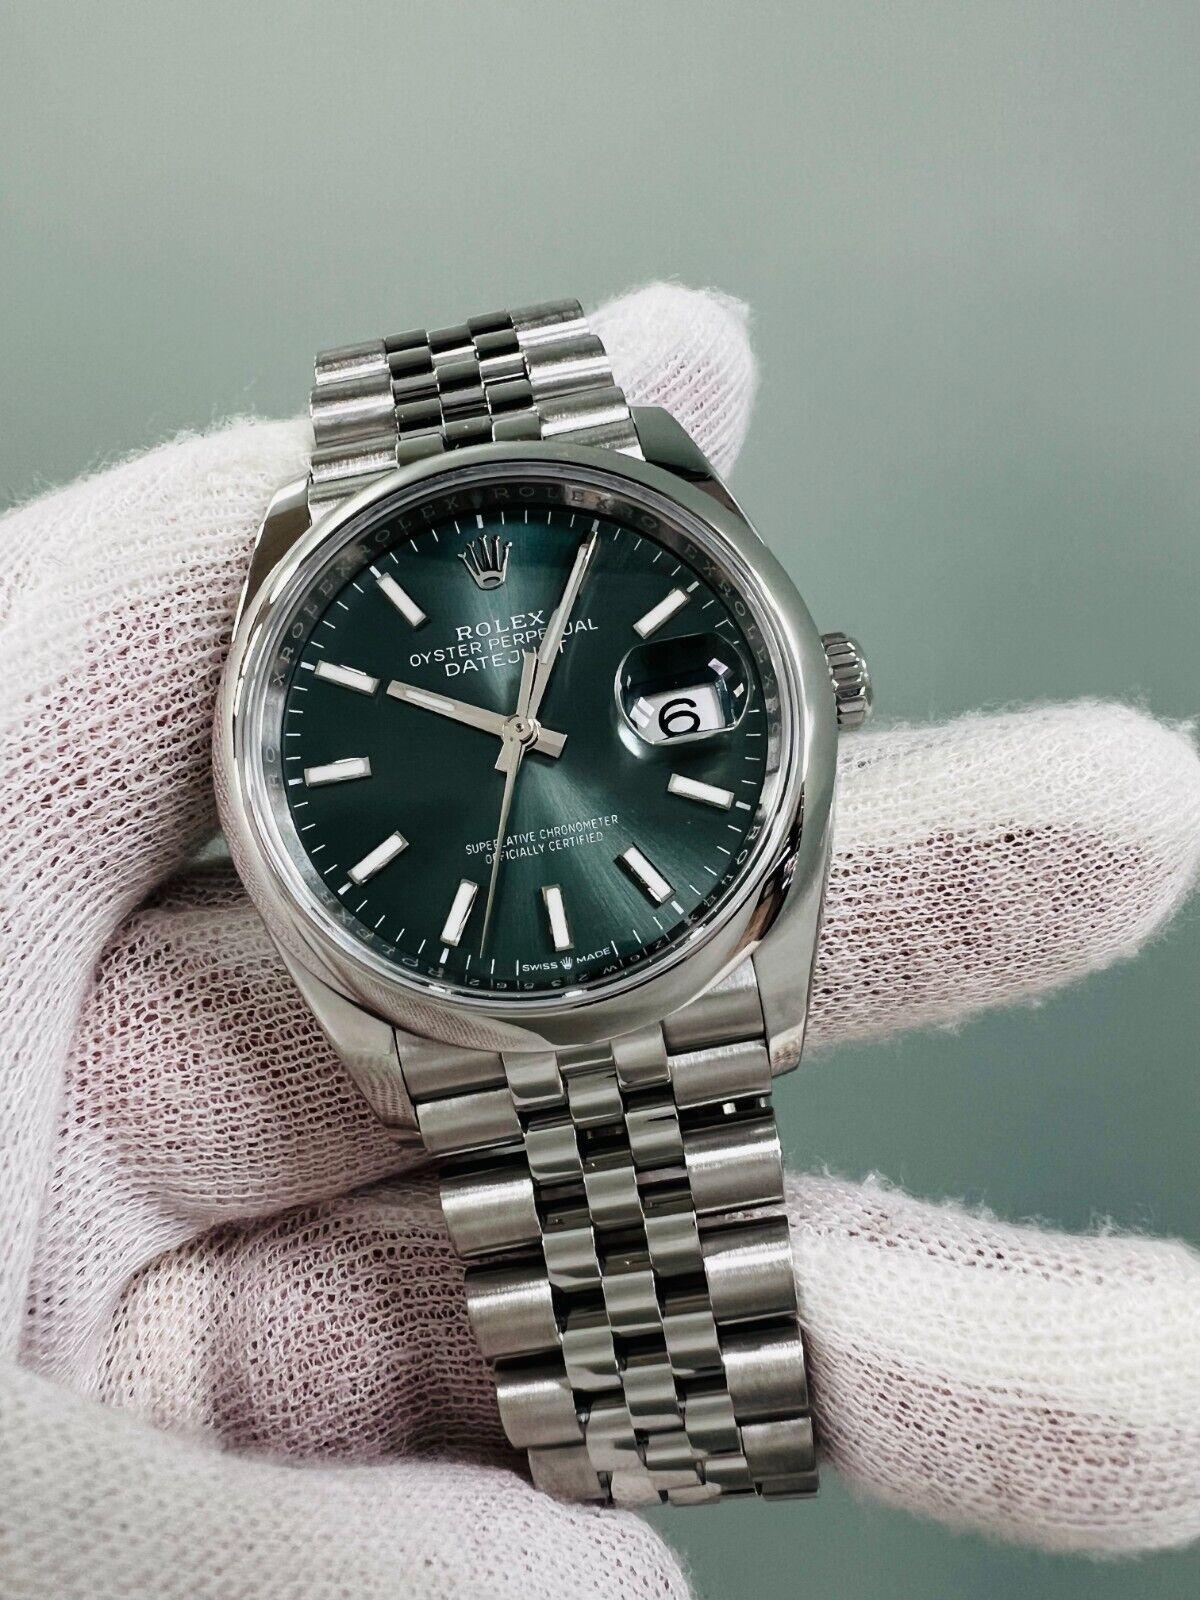 Style Number: 126200

Serial: Z6W23***

Year: 2022
 
Model: Datejust
 
Case Material: Stainless Steel 
 
Band: Stainless Steel 
 
Bezel: Stainless Steel 
 
Dial: Mint Green
 
Face: Sapphire Crystal 
 
Case Size: 36mm 
 
Includes: 
-Rolex Box &